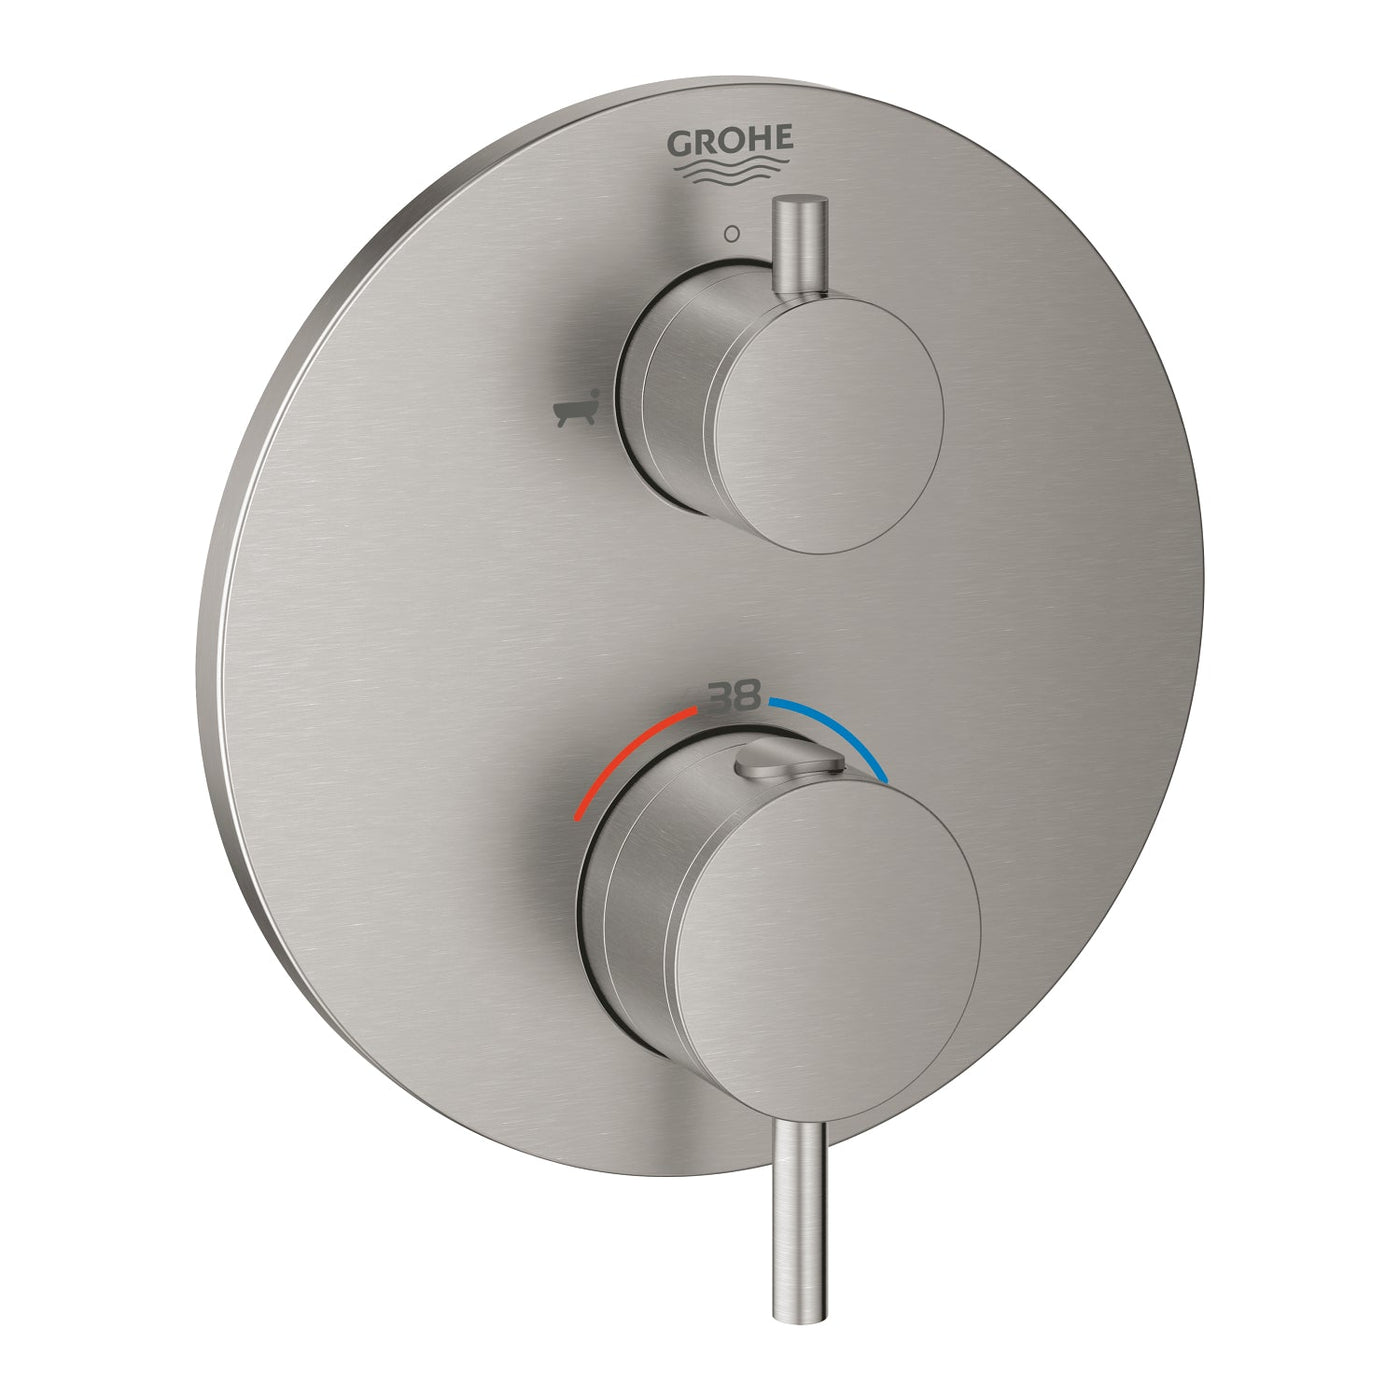 Grohe Supersteel Atrio Thermostatic bath tub mixer for 2 outlets with integrated shut off/diverter valve - Letta London - Twin Valves With Diverter